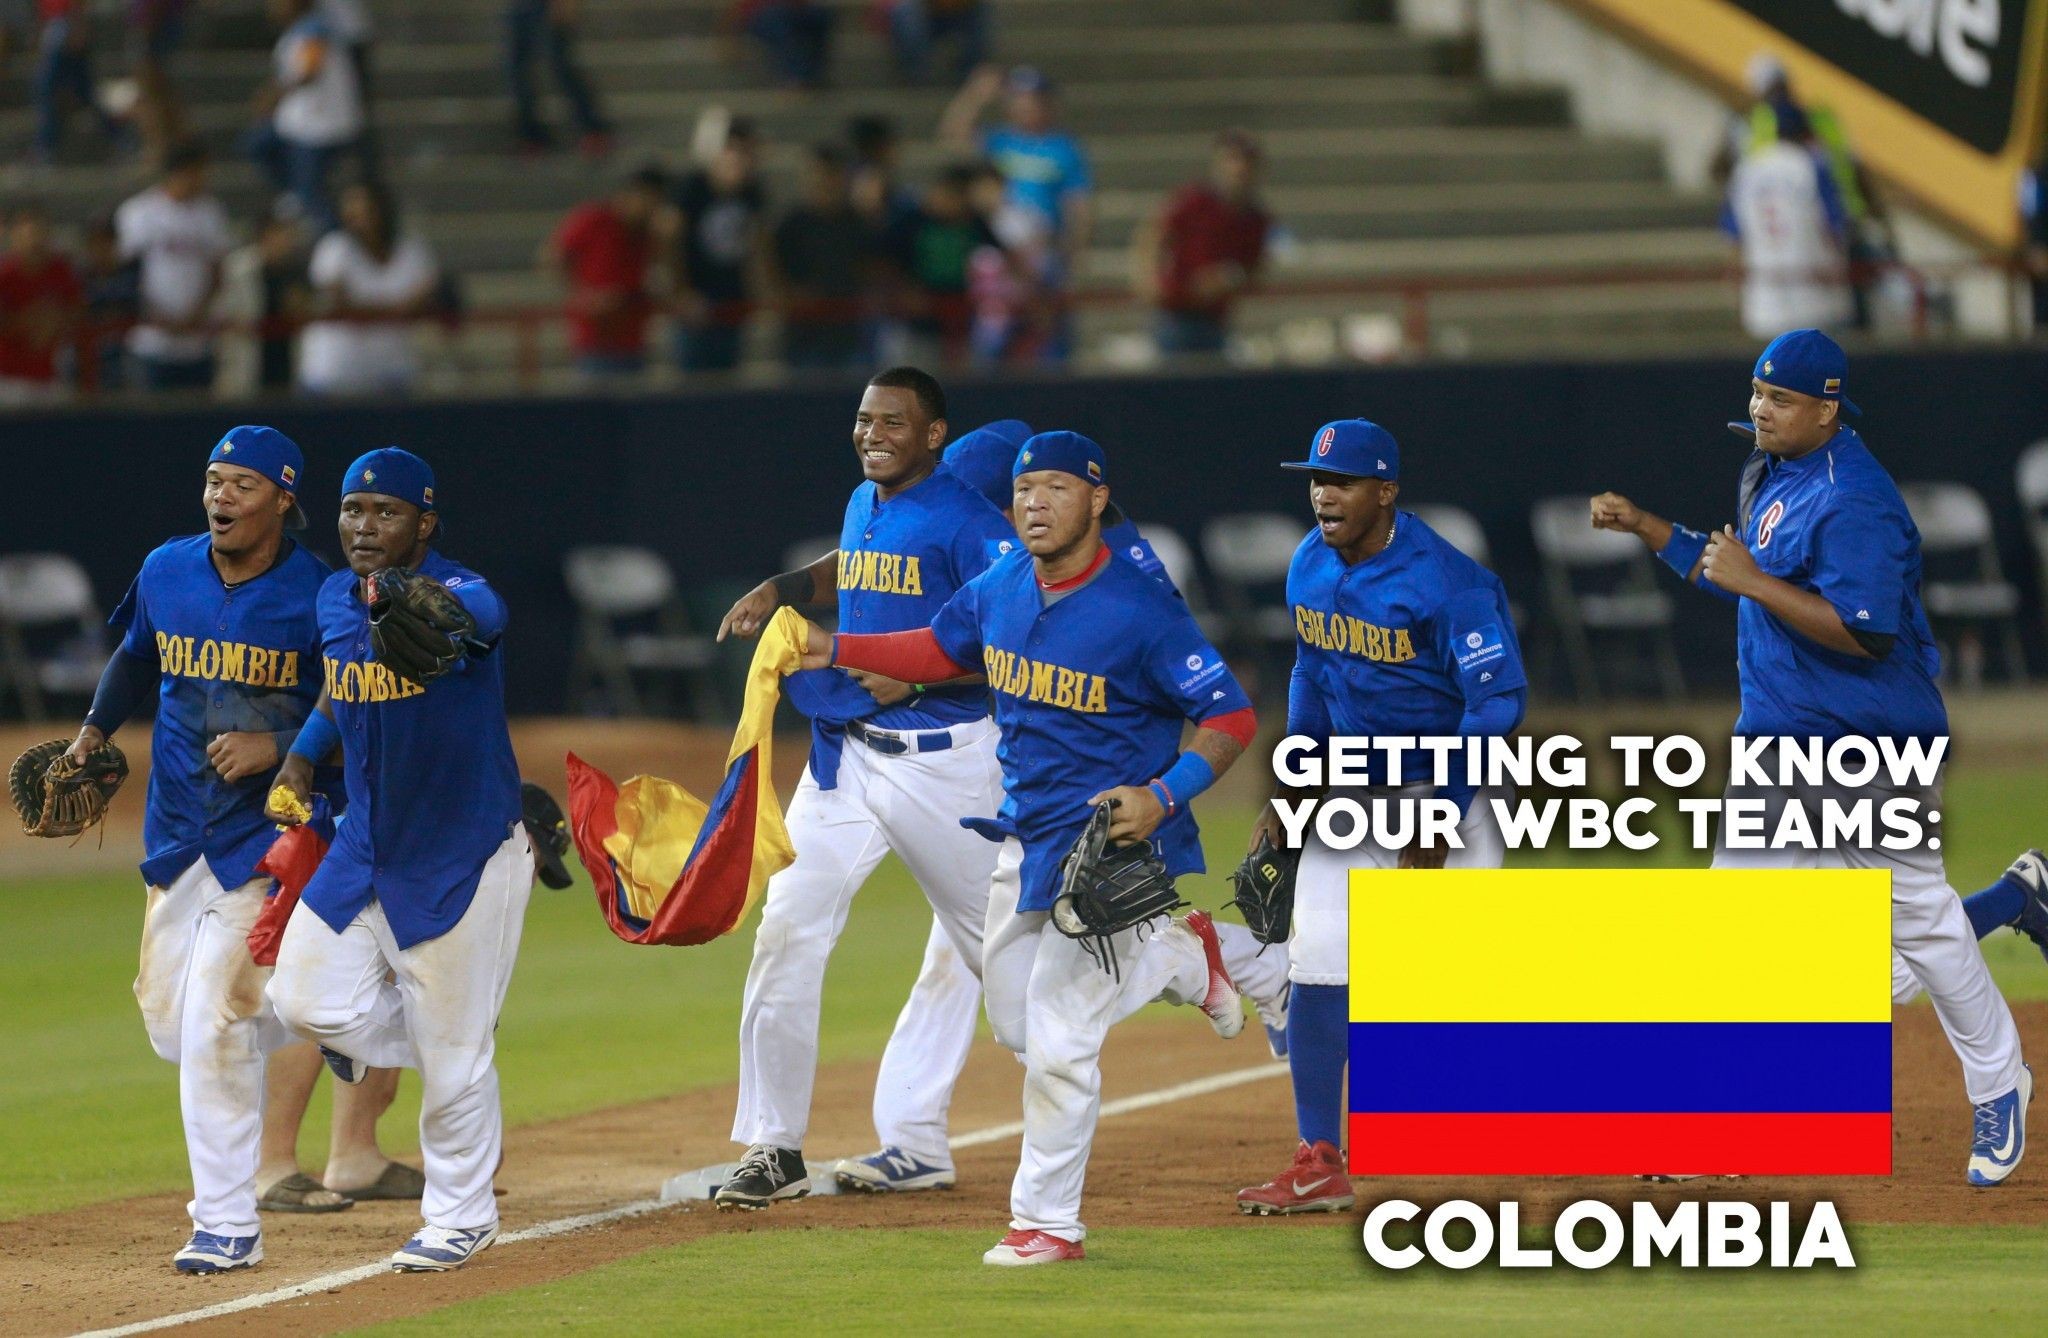 World Baseball Classic 2017 Can two star pitchers make Colombia a